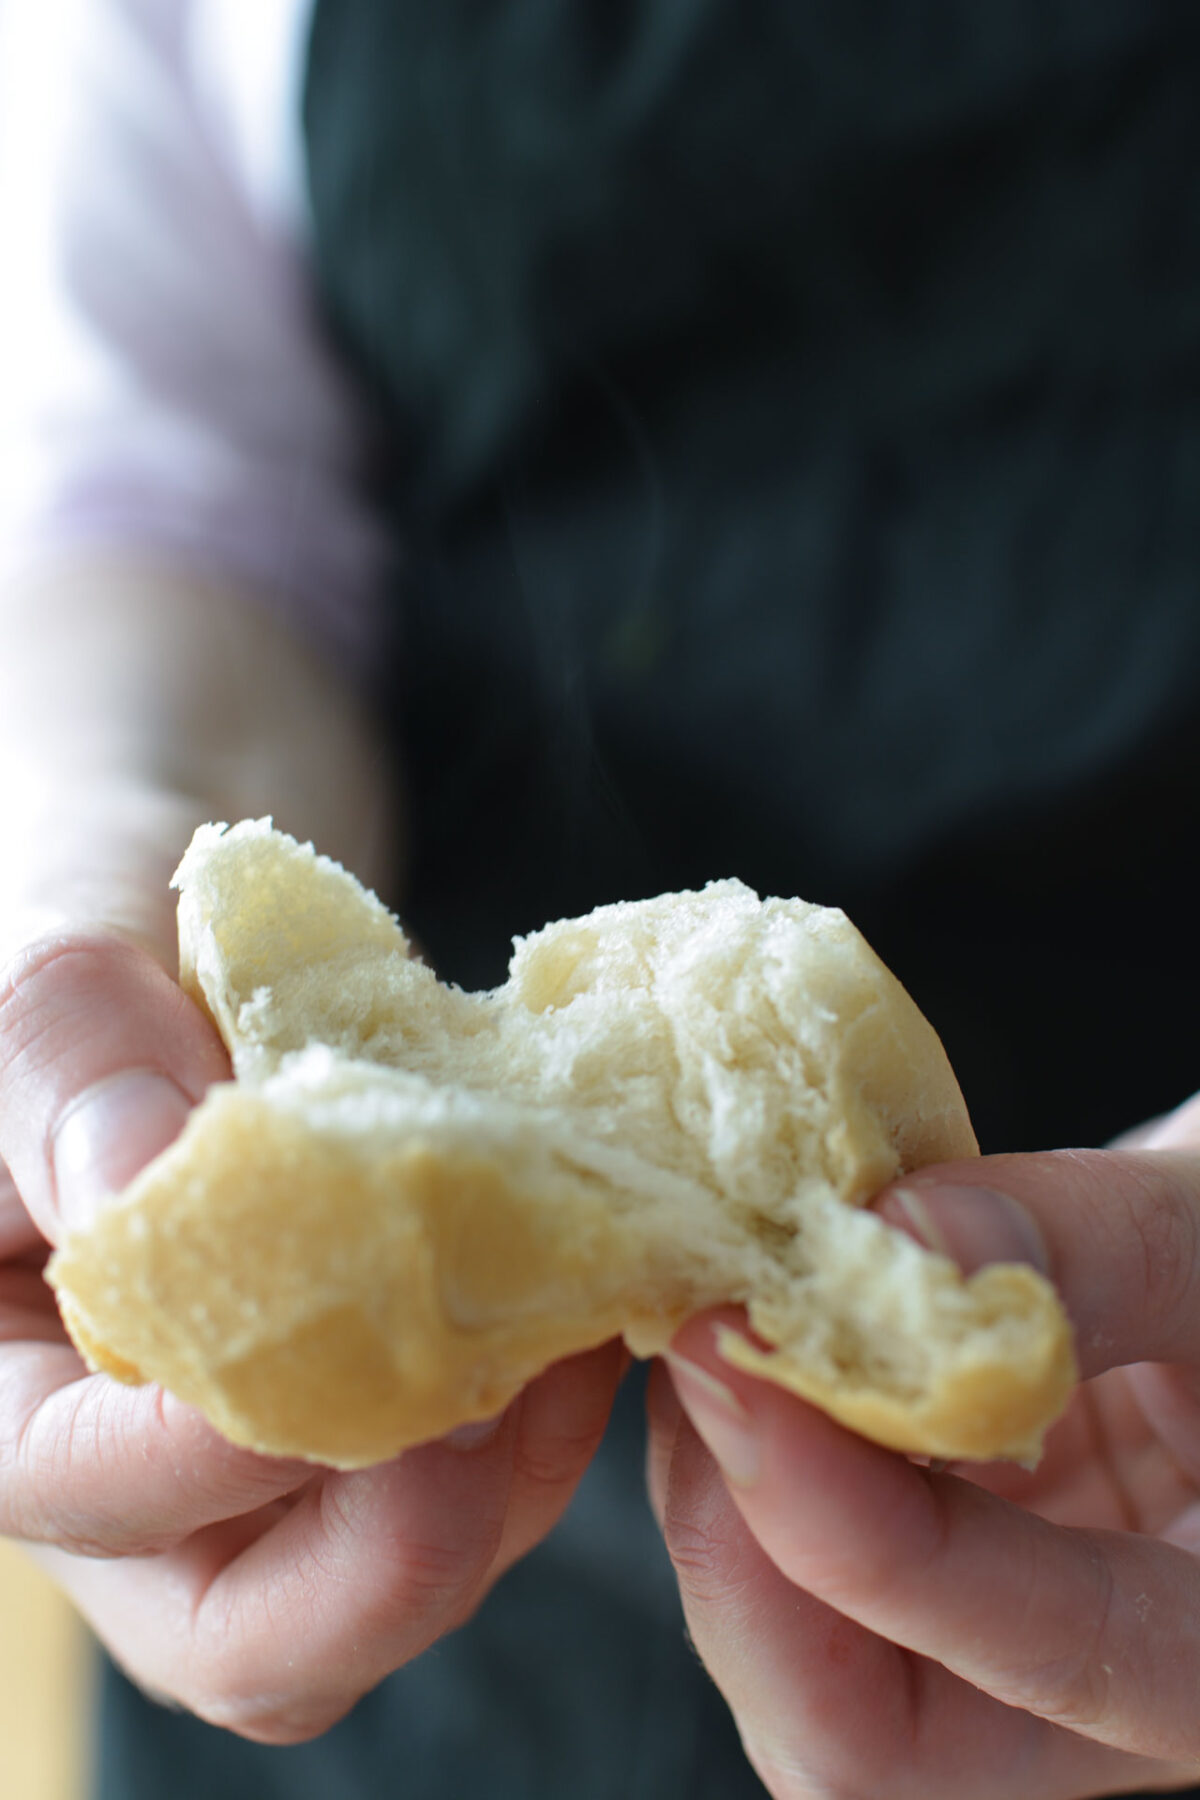 A close-up image of a woman's hands breaking open a freshly baked doughball, revealing the textured interior.